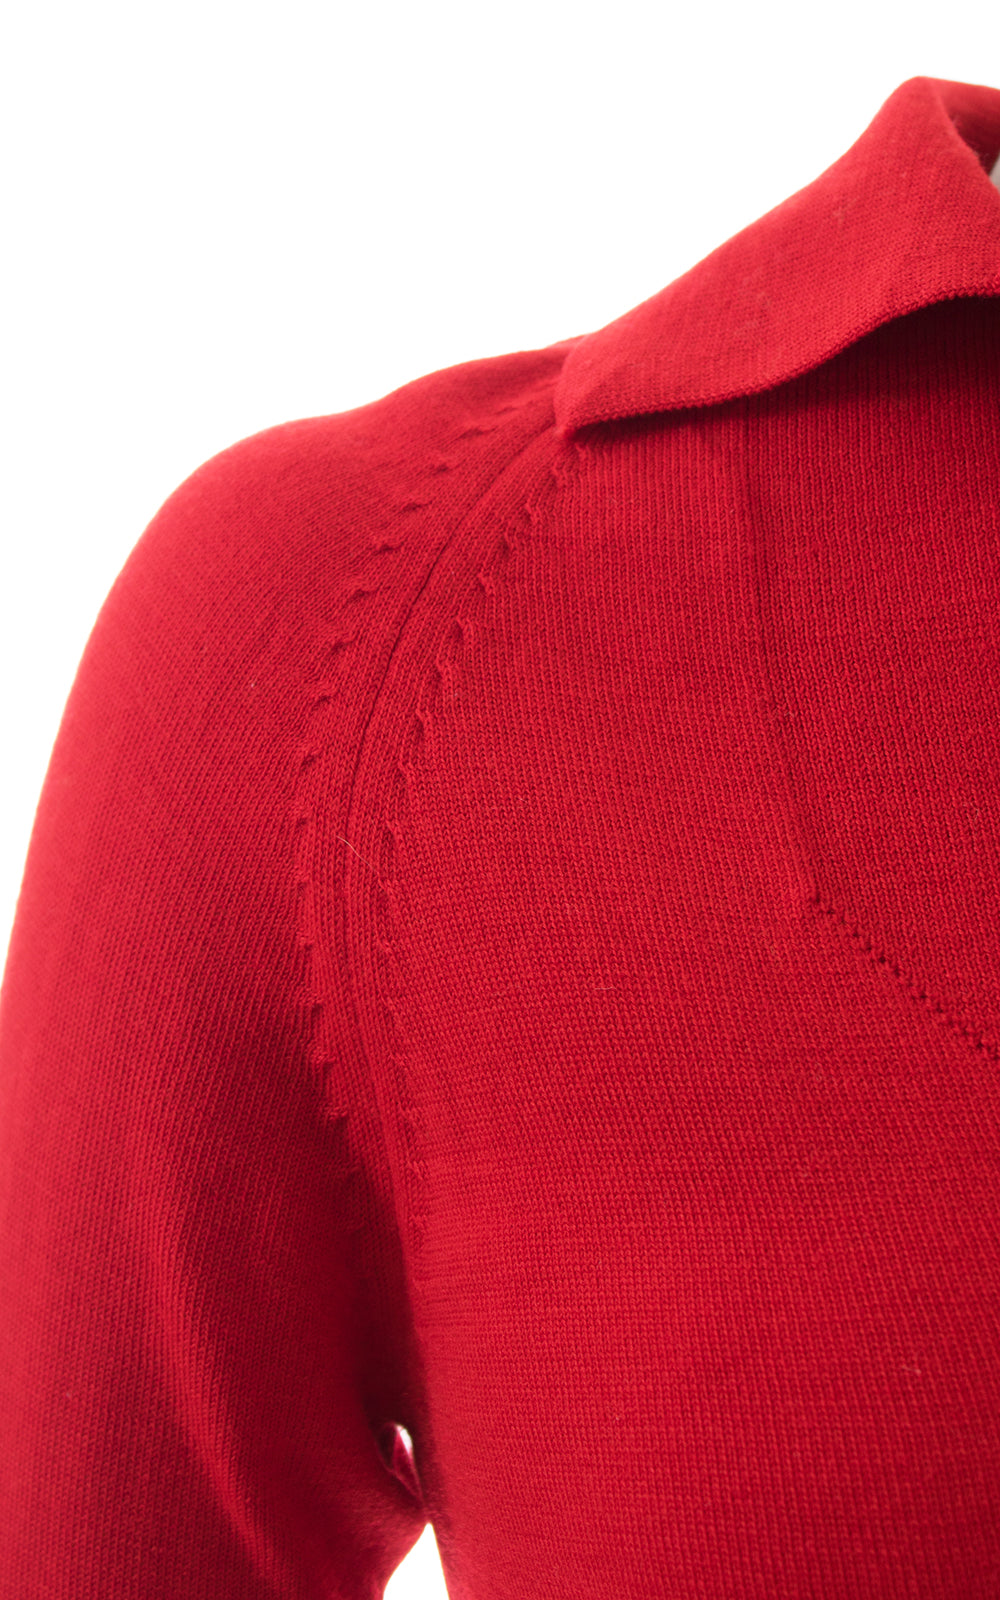 1950s Red Knit Wool Cropped Sweater